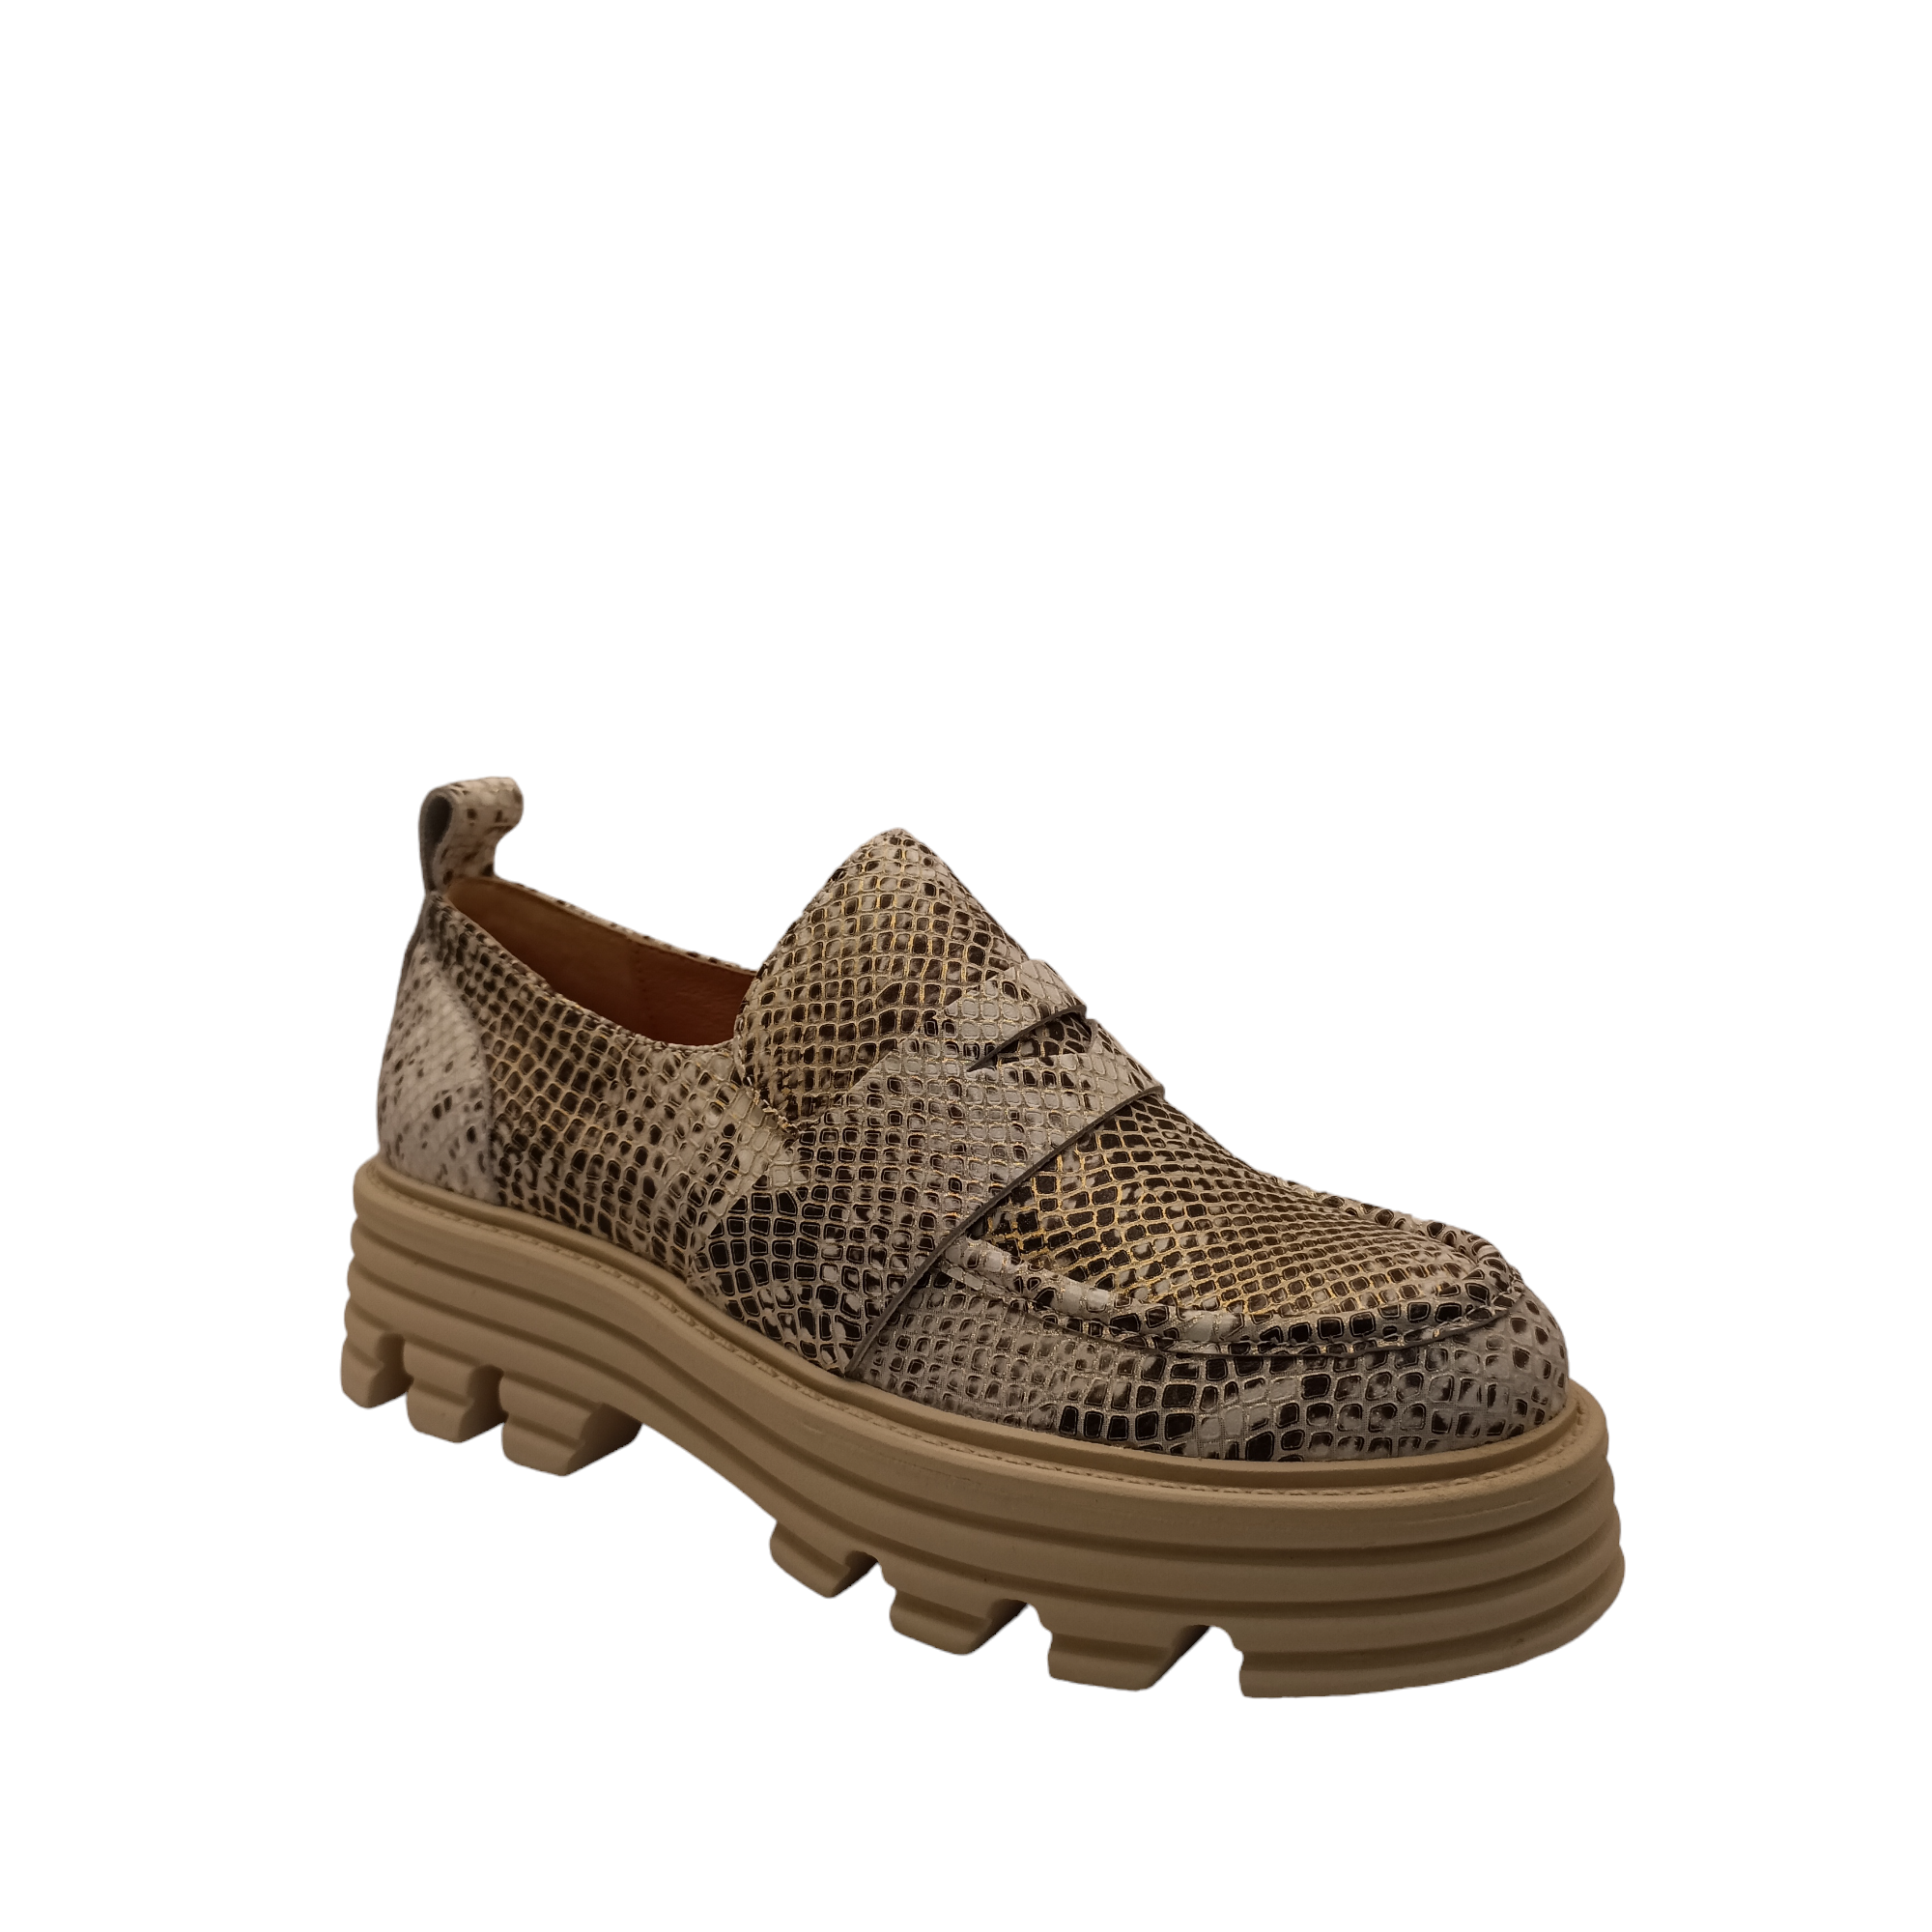 Side angle view of Jania, Slip on shoe from EOS. Champagne Snake pattern with a bone coloured platform. small heel loop and elastic gusset under the tongue upper. Shop WOmens Shoes ONline and IN-store with shoe&amp;me Mount Maunganui Tauranga.